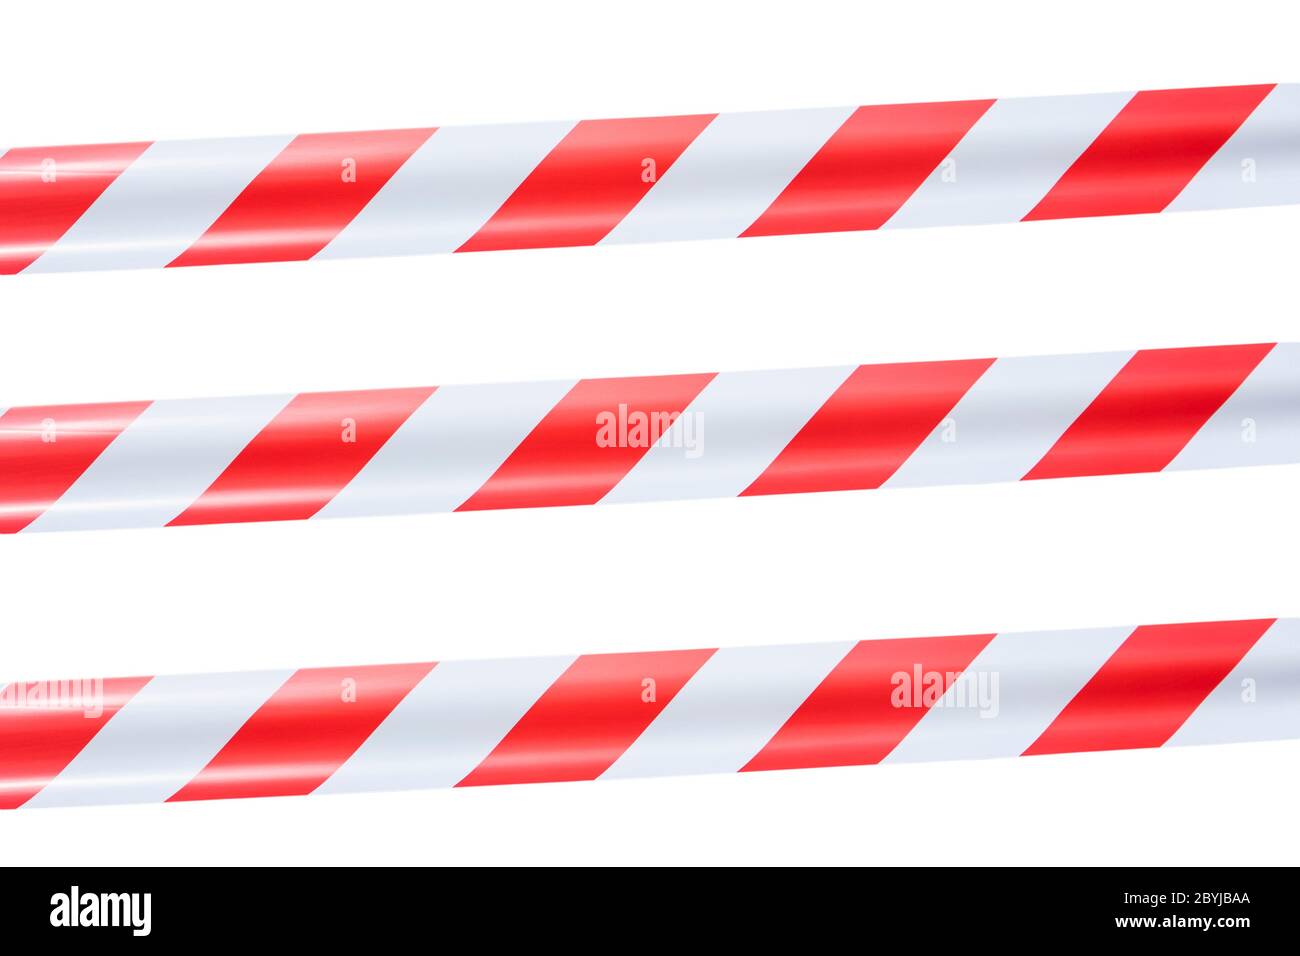 red and white warning tape isolated on white background Stock Photo